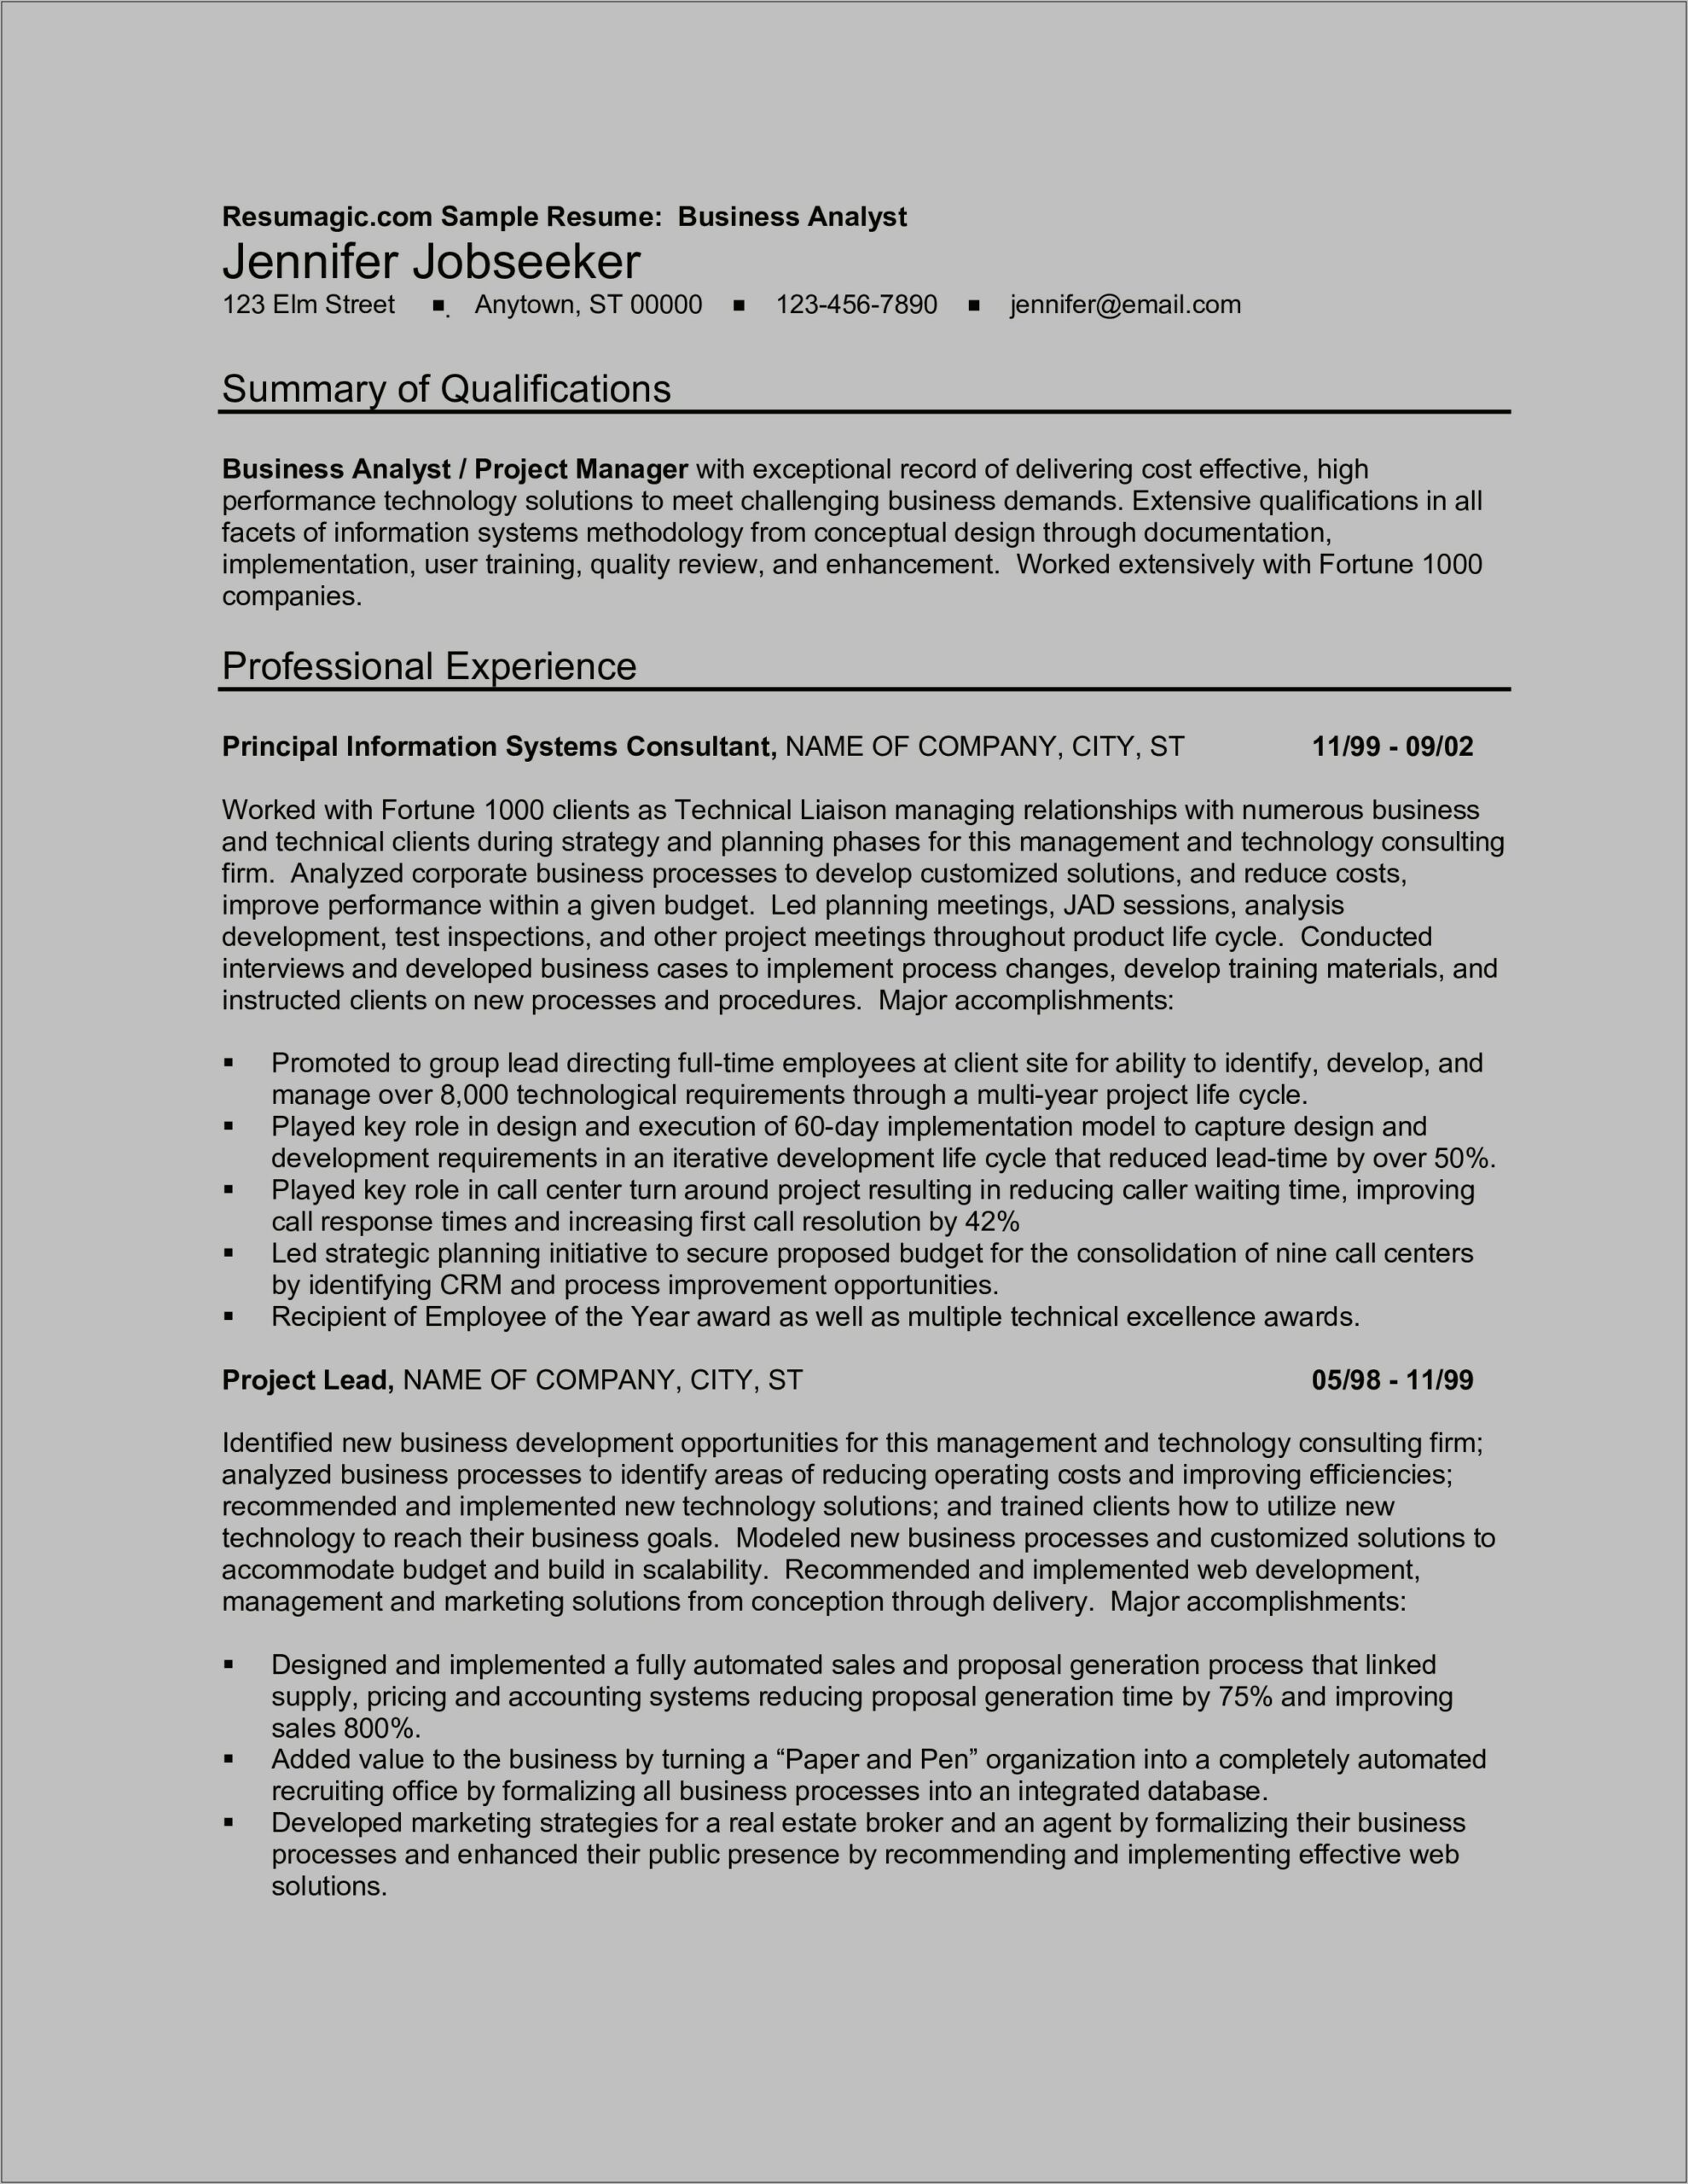 Business Objective Statement For Resume